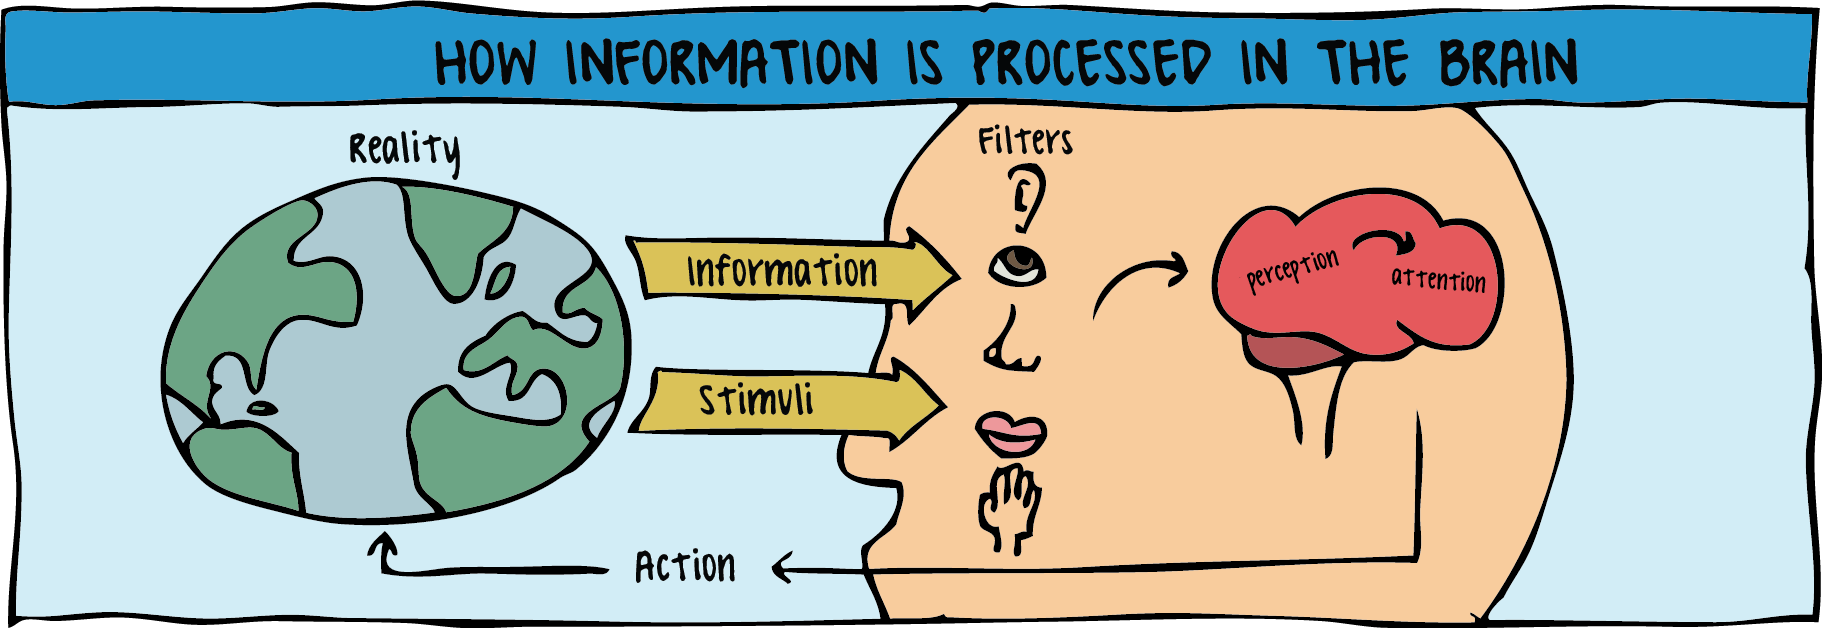 How Information is Processed in the Brain